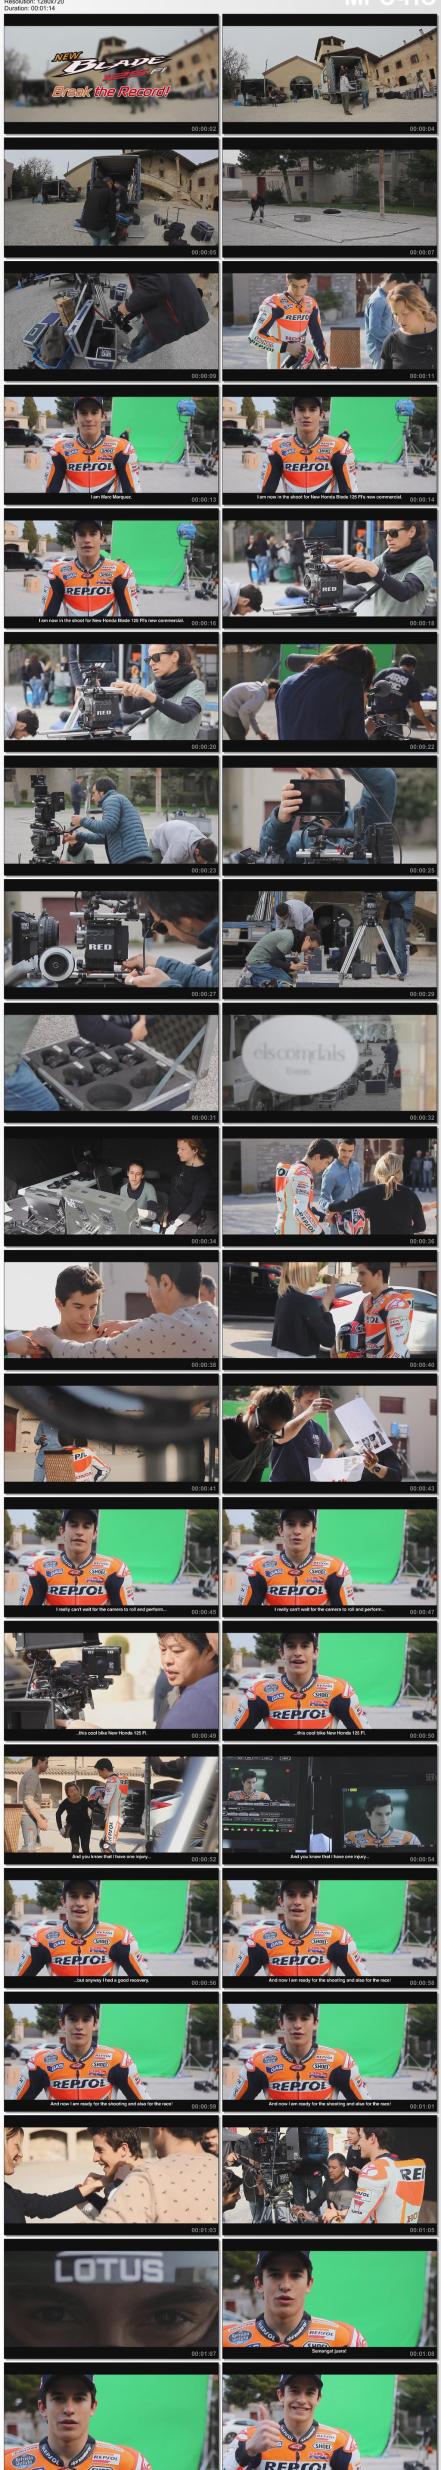 Behind The Scene TVC Honda Blade 125 FI with Marc Marquez by pertamax7.com